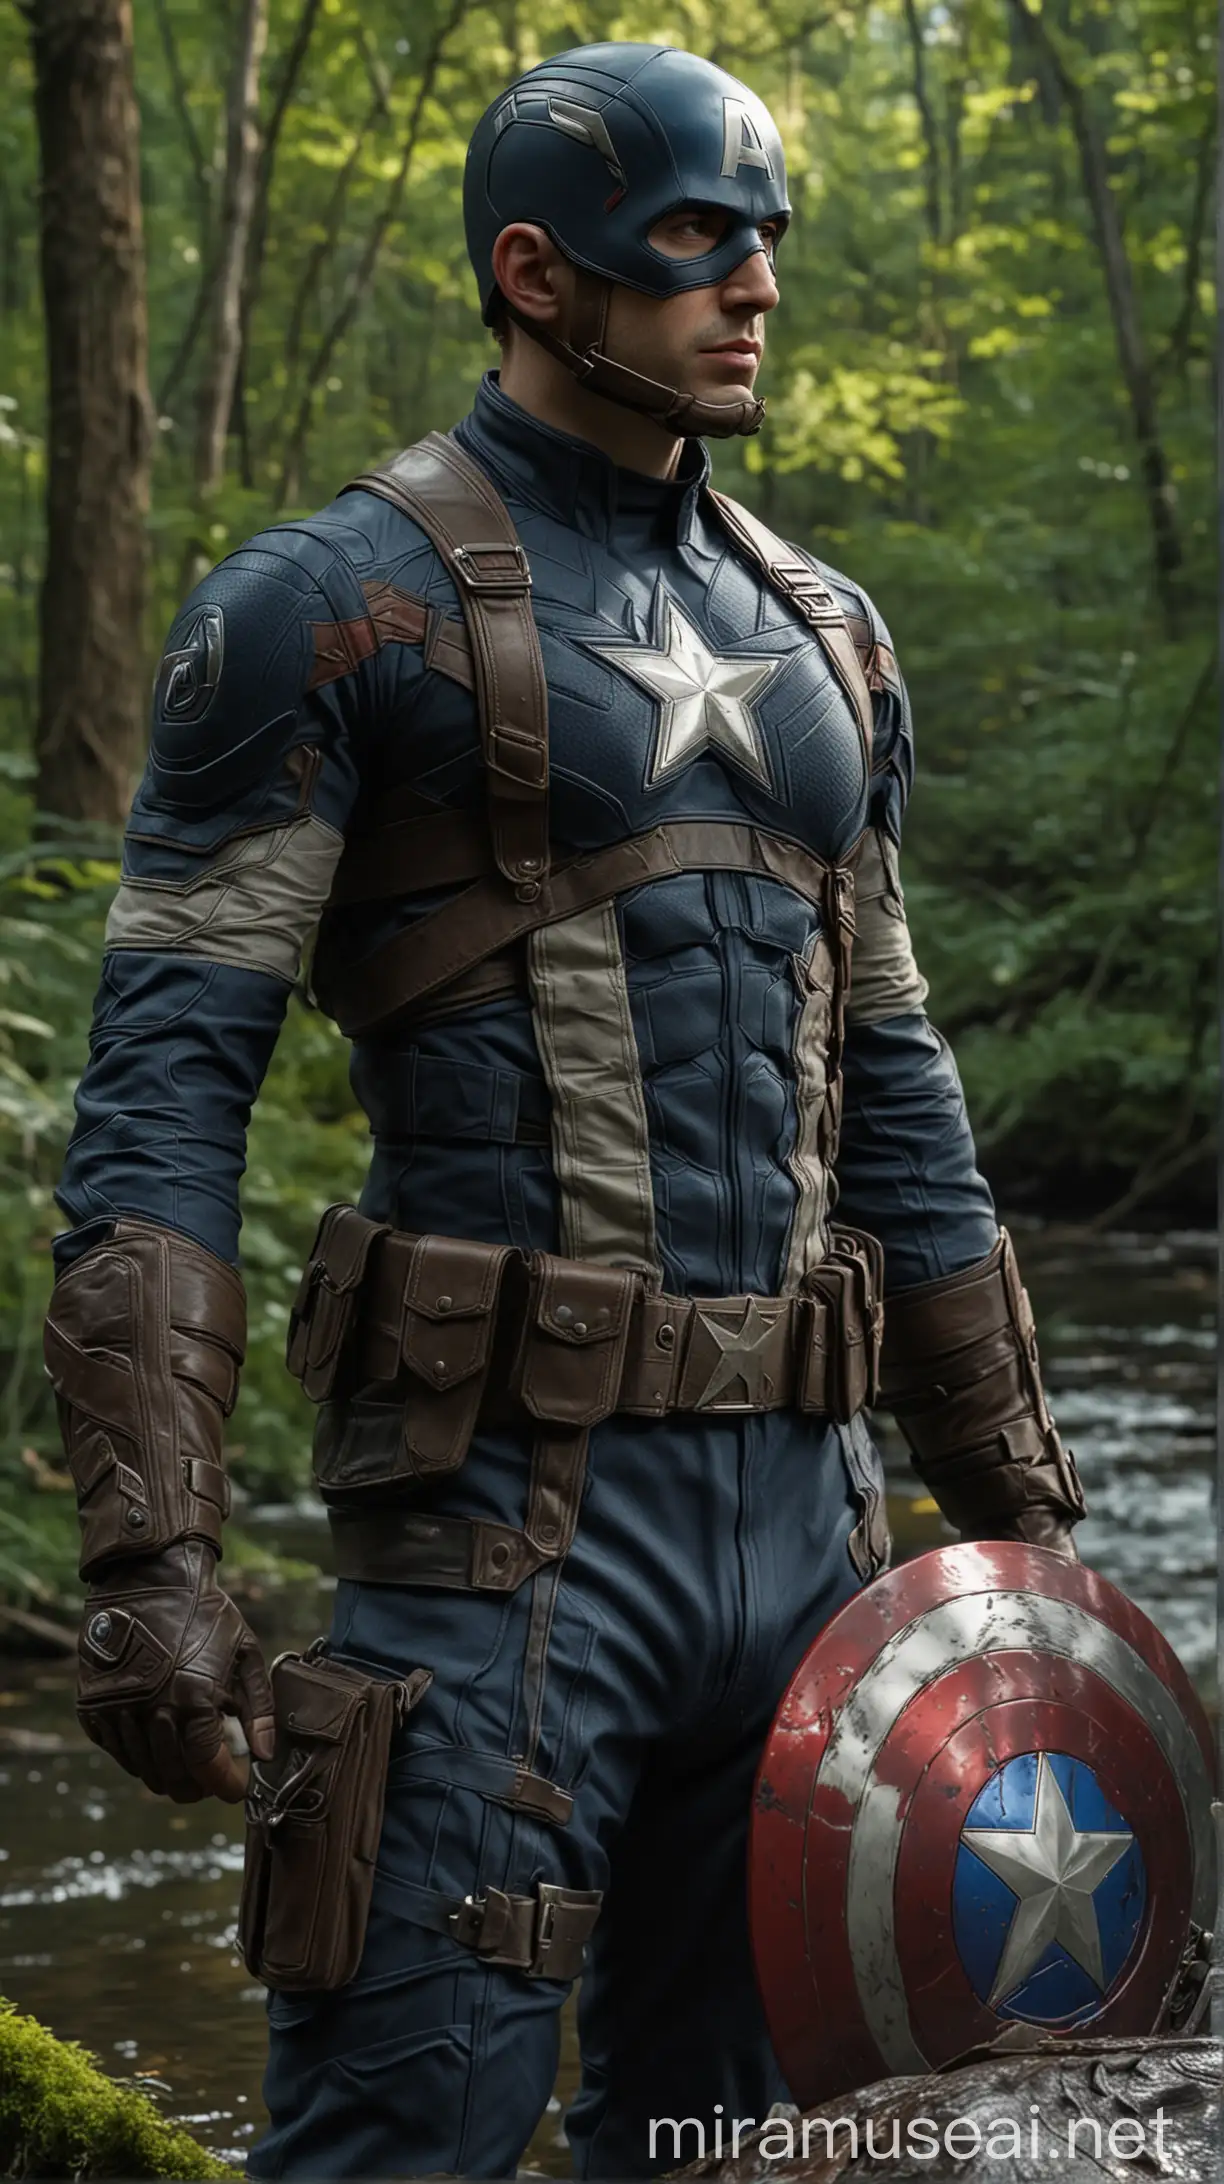 Captain America Marvel Character in Detailed Forest and River Scene